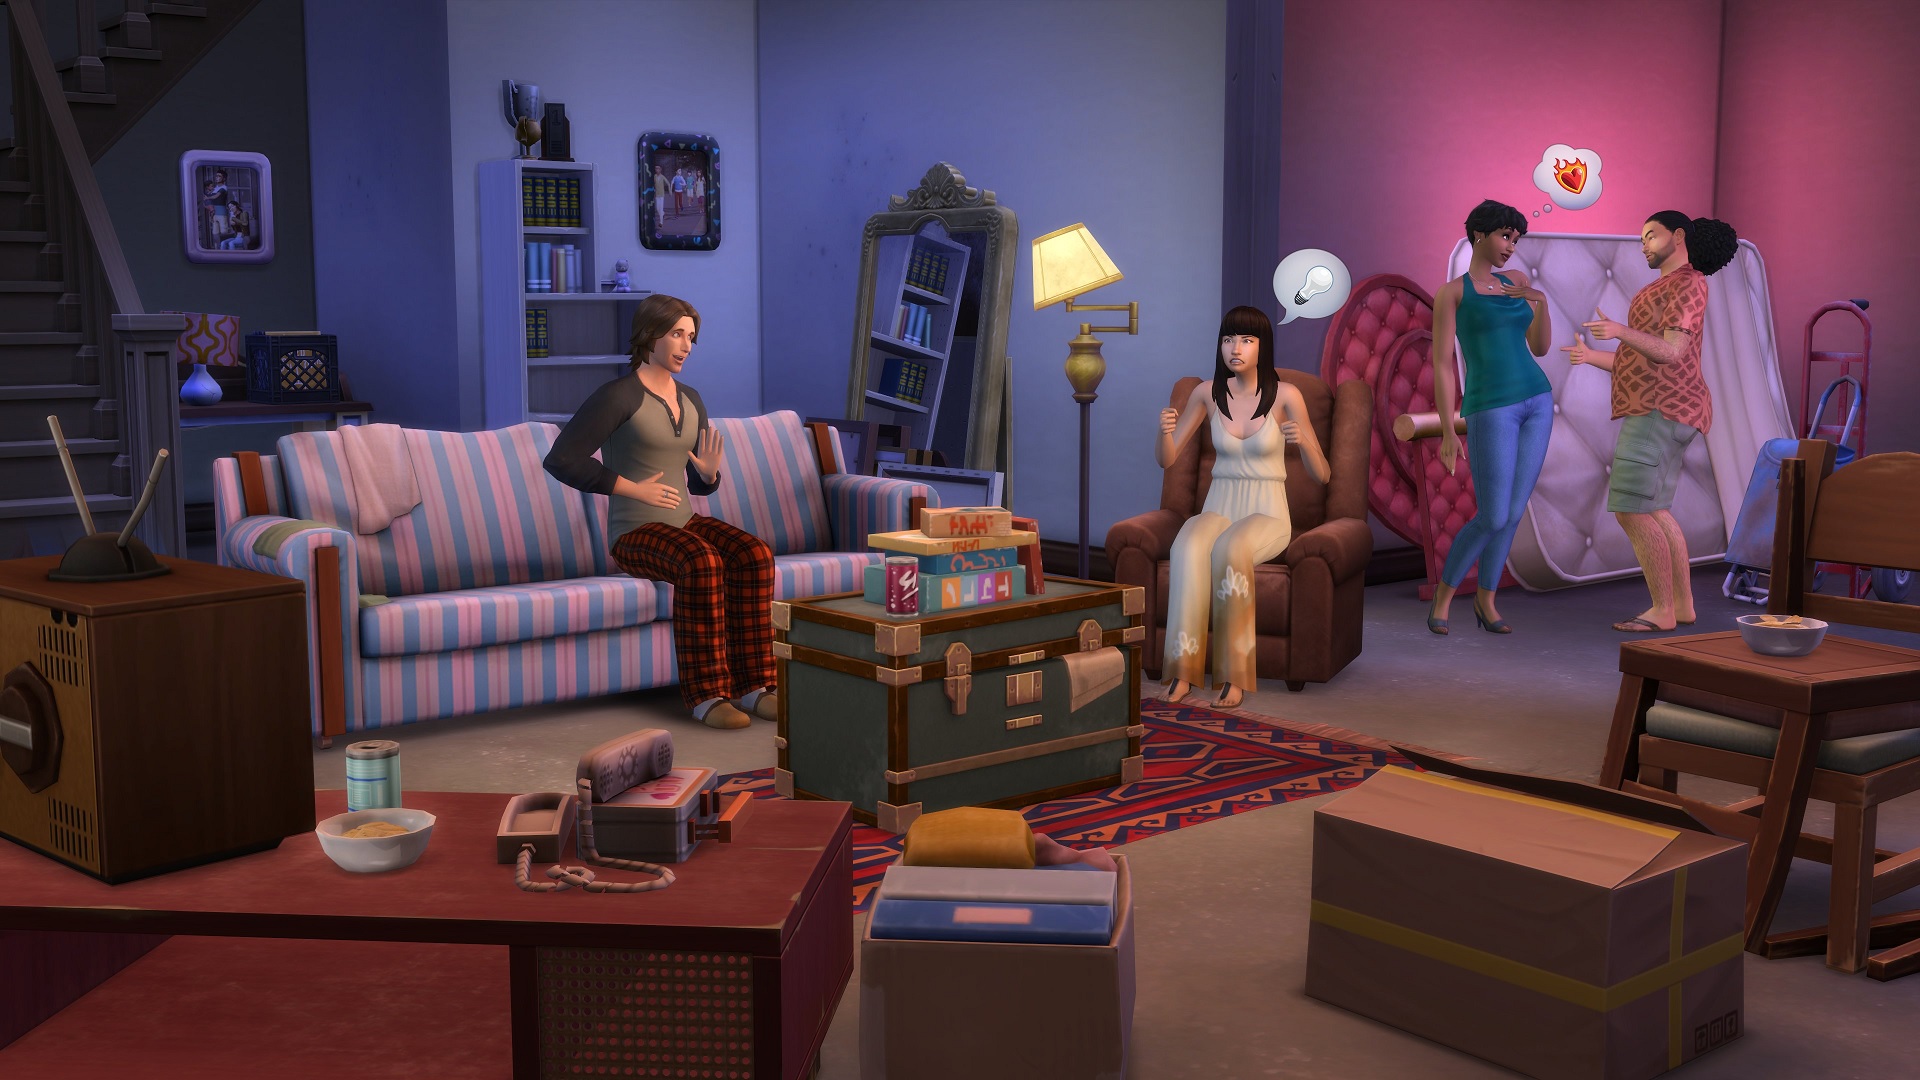 Leaked Sims 4 expansion points to the ultimate millennial simulation -  rental properties